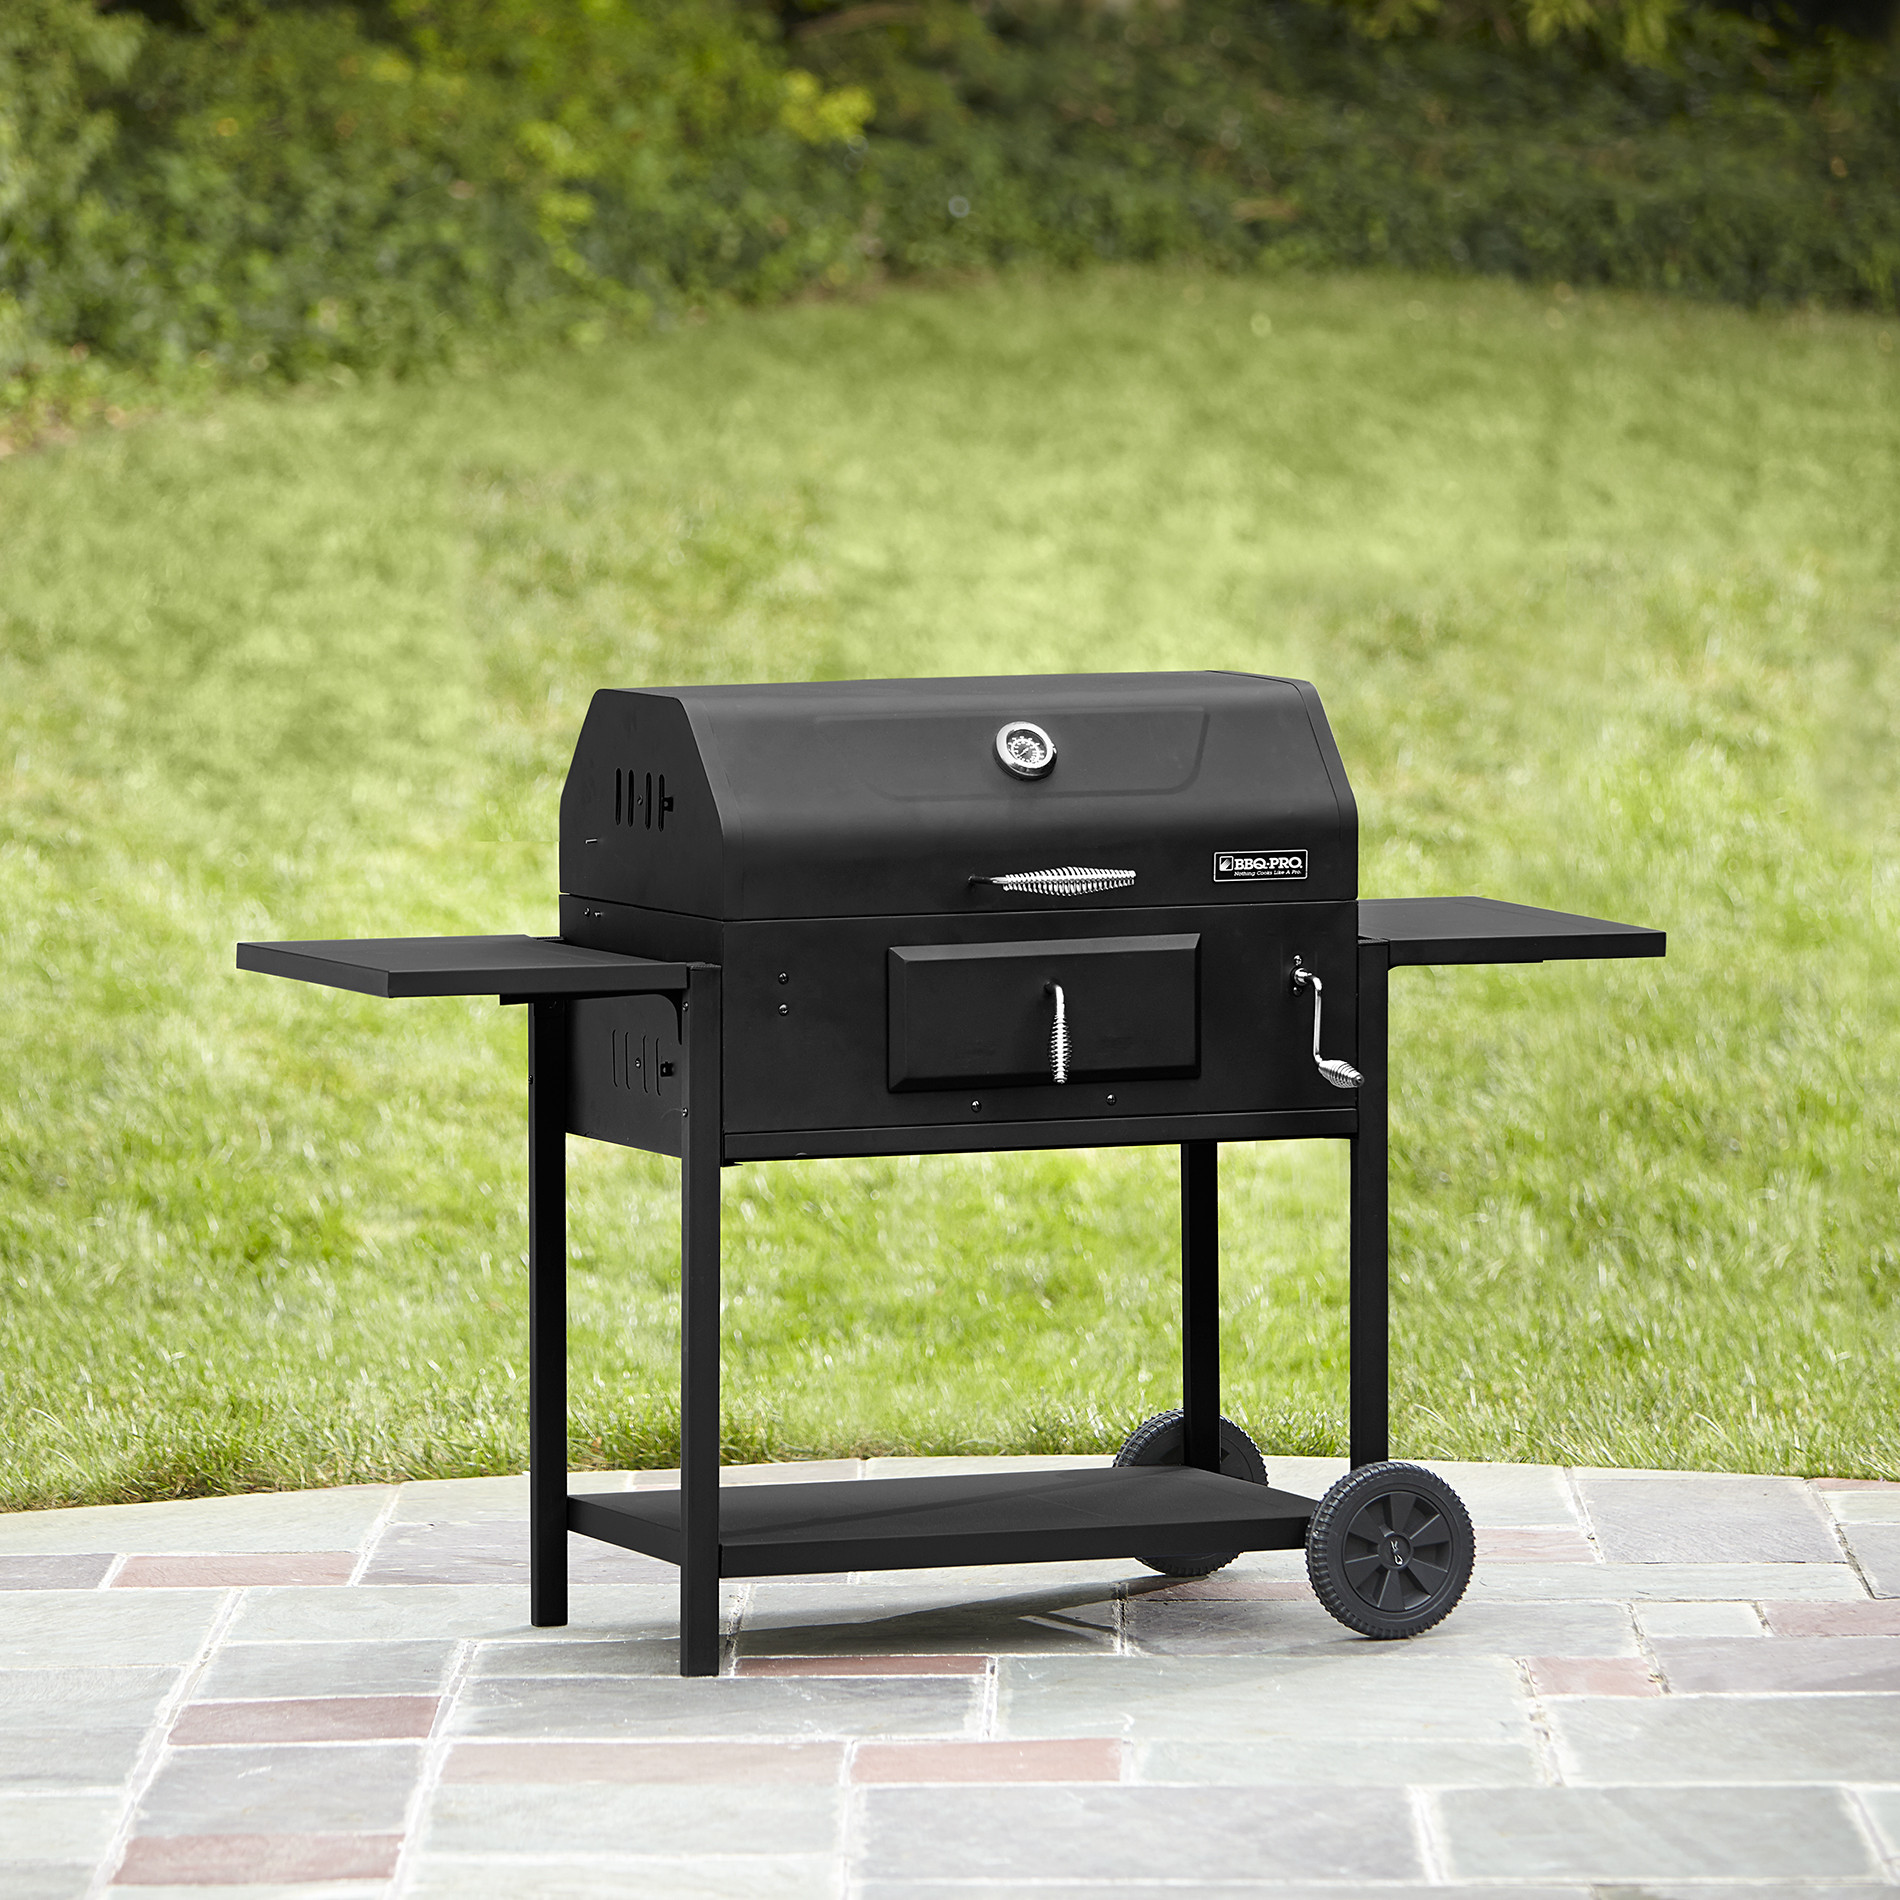 Backyard Barbecue Grill
 BBQ Pro Deluxe Charcoal Grill Outdoor Living Grills